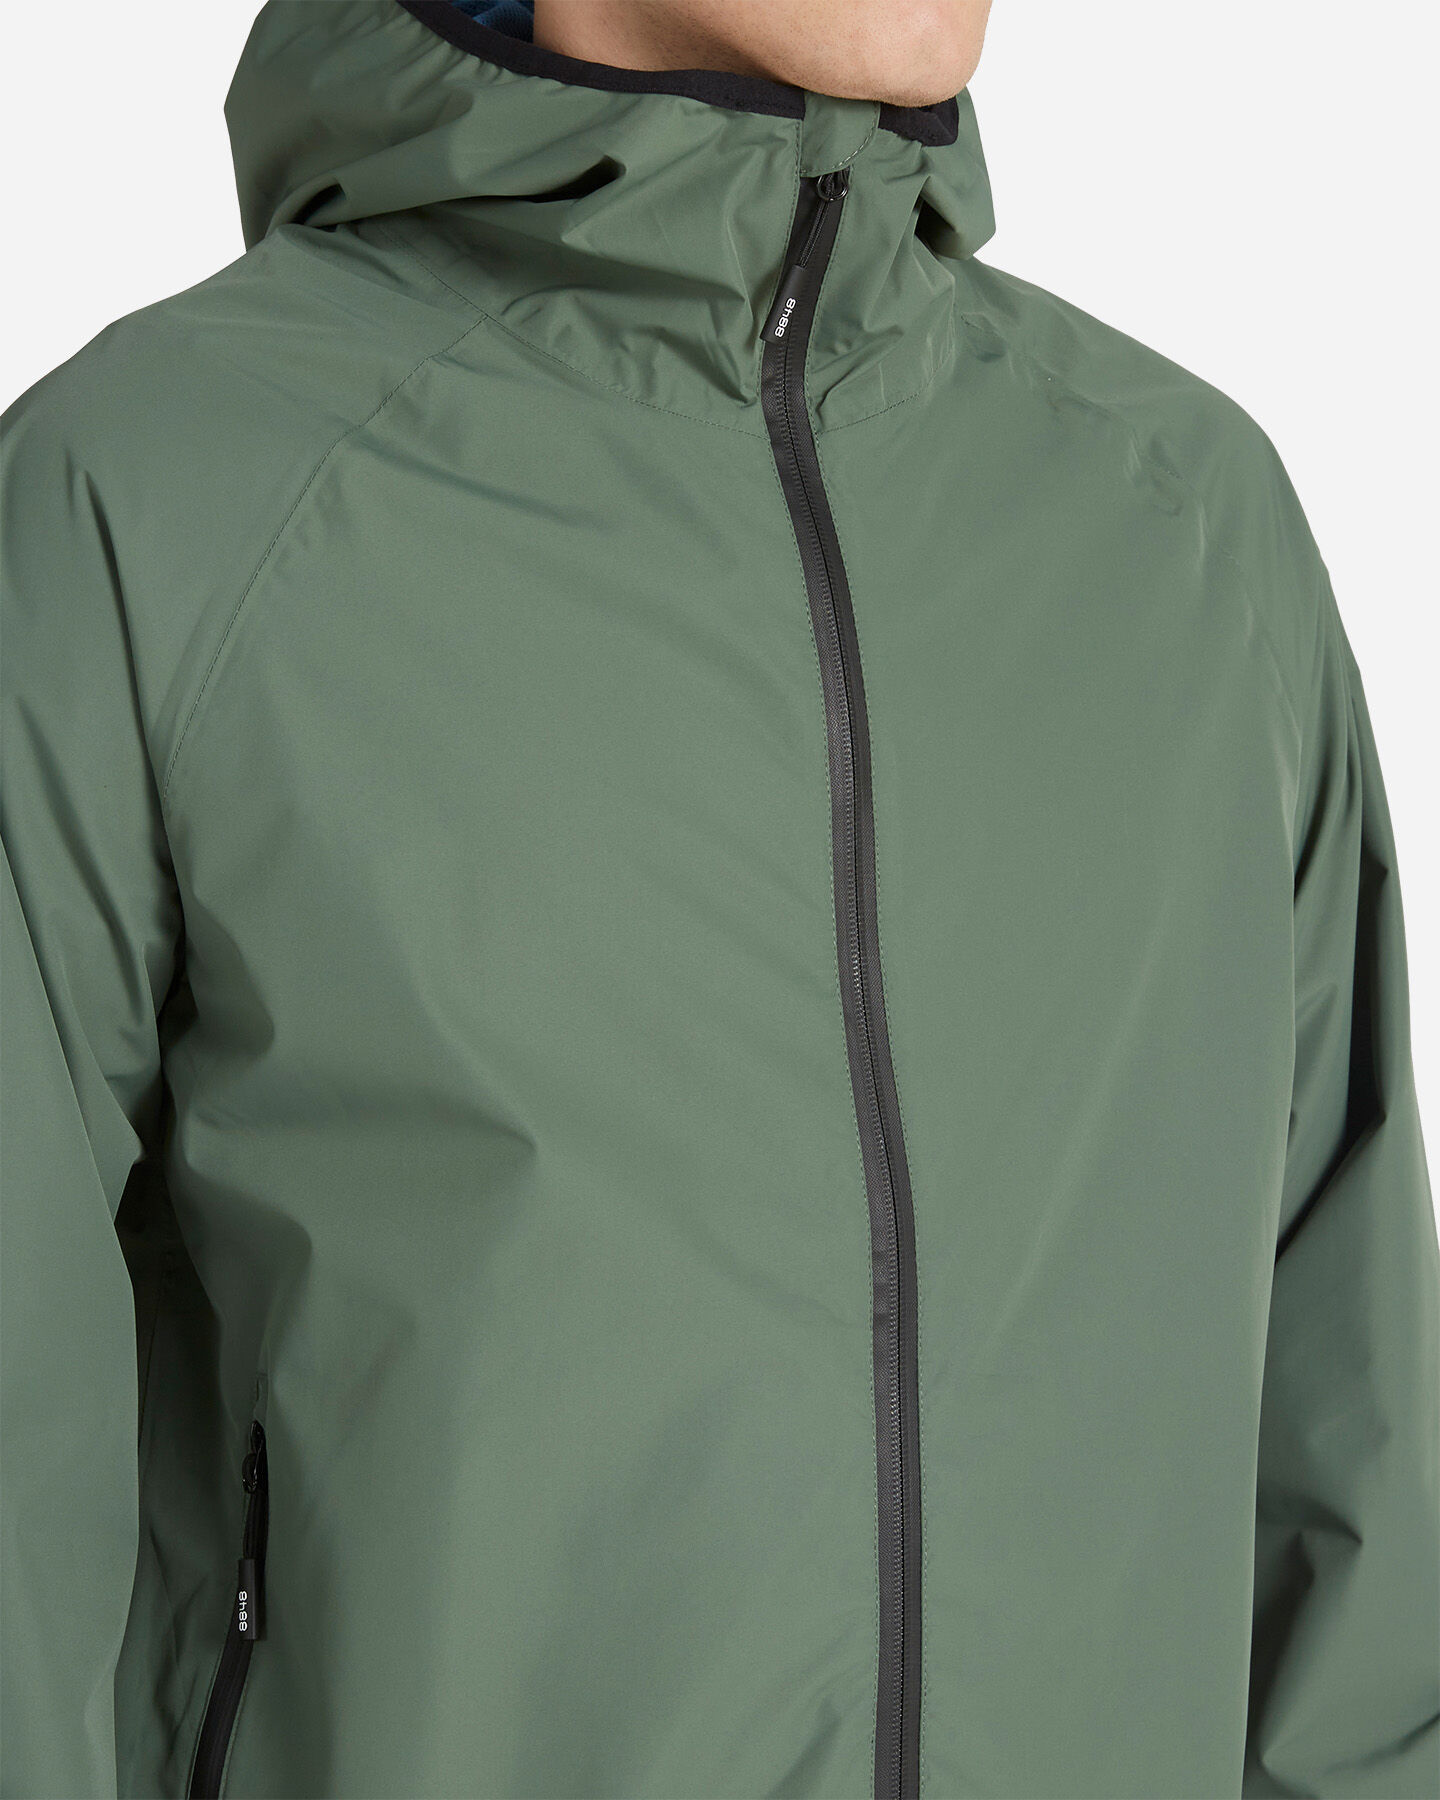  Giacca outdoor 8848 DUCK M S4121256|776/555|S scatto 4